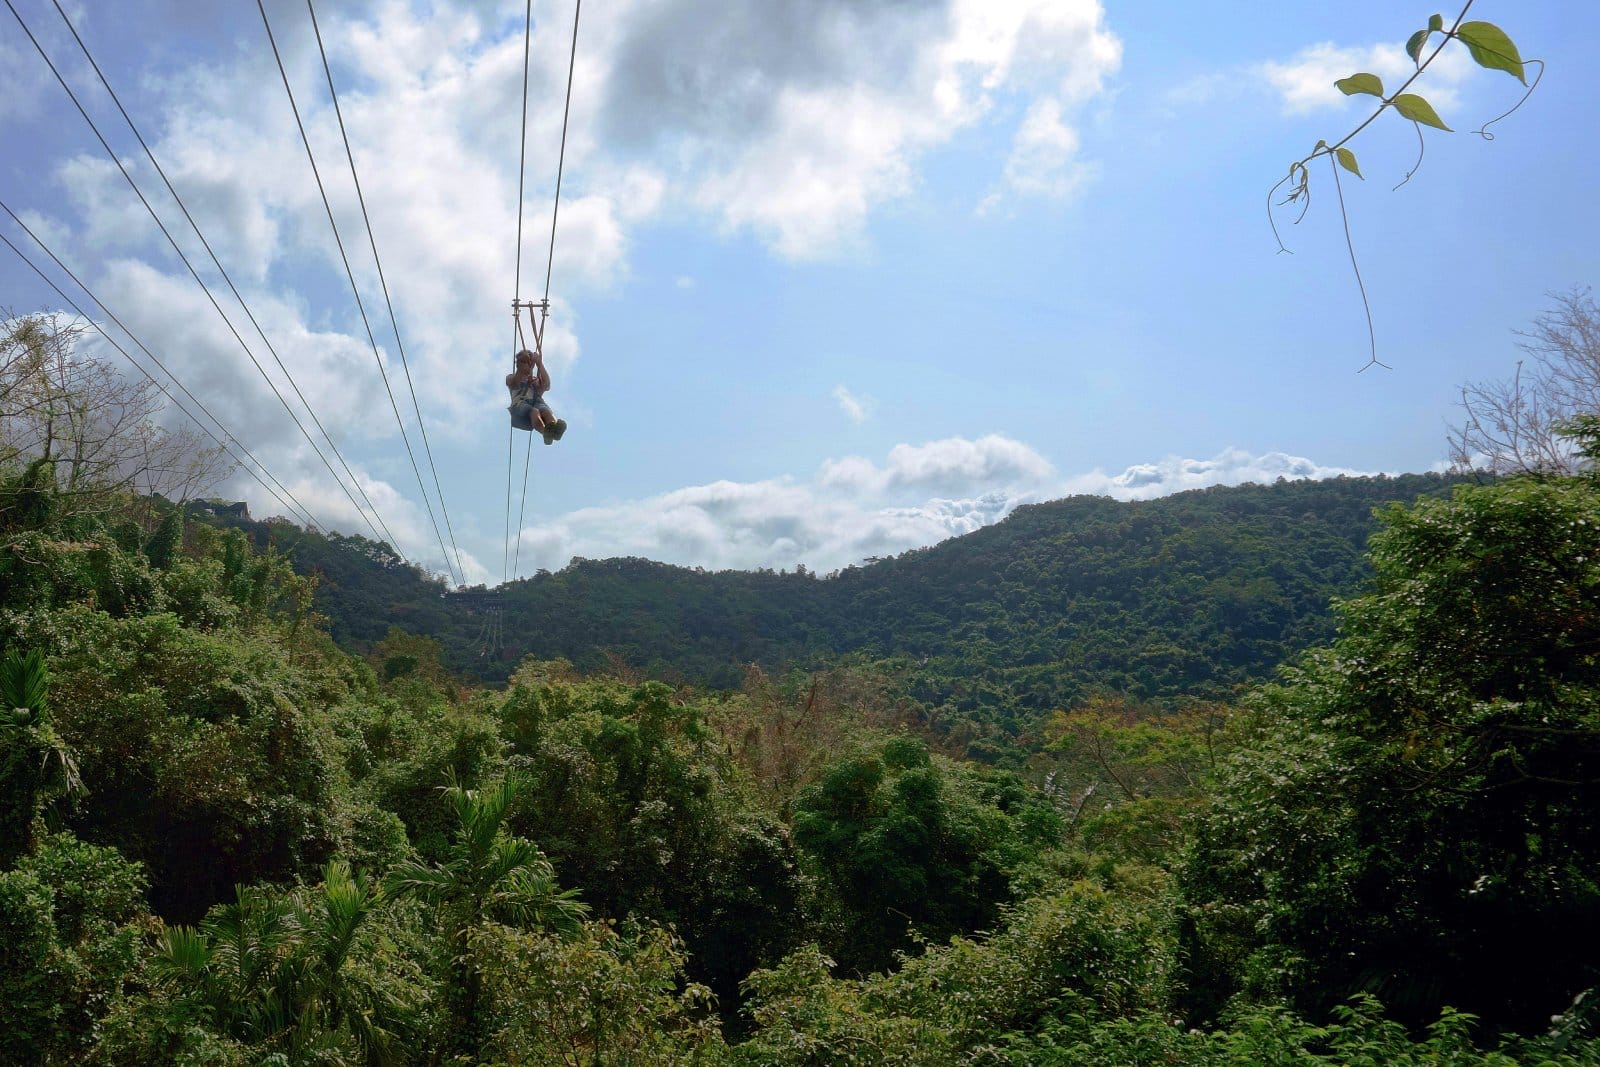 <p><span>For thrill-seekers, Punta Cana’s zip-lining adventures offer an exhilarating way to experience the region’s stunning landscapes. Soar above lush forests and scenic plantations, enjoying panoramic views while getting an adrenaline rush. Various operators in the area provide zip-lining tours that cater to different experience levels, ensuring safety and fun for everyone.</span></p> <p><b>Insider’s Tip: </b><span>Wear comfortable and secure clothing suitable for physical activity, and don’t forget to secure any loose items before your ride.</span></p> <p><b>How To Get There: </b><span>Most zip-lining tours include hotel pick-up and drop-off services.</span></p> <p><b>Best Time To Travel: </b><span>From December to April, the dry season is the most comfortable time for outdoor activities like zip-lining.</span></p>